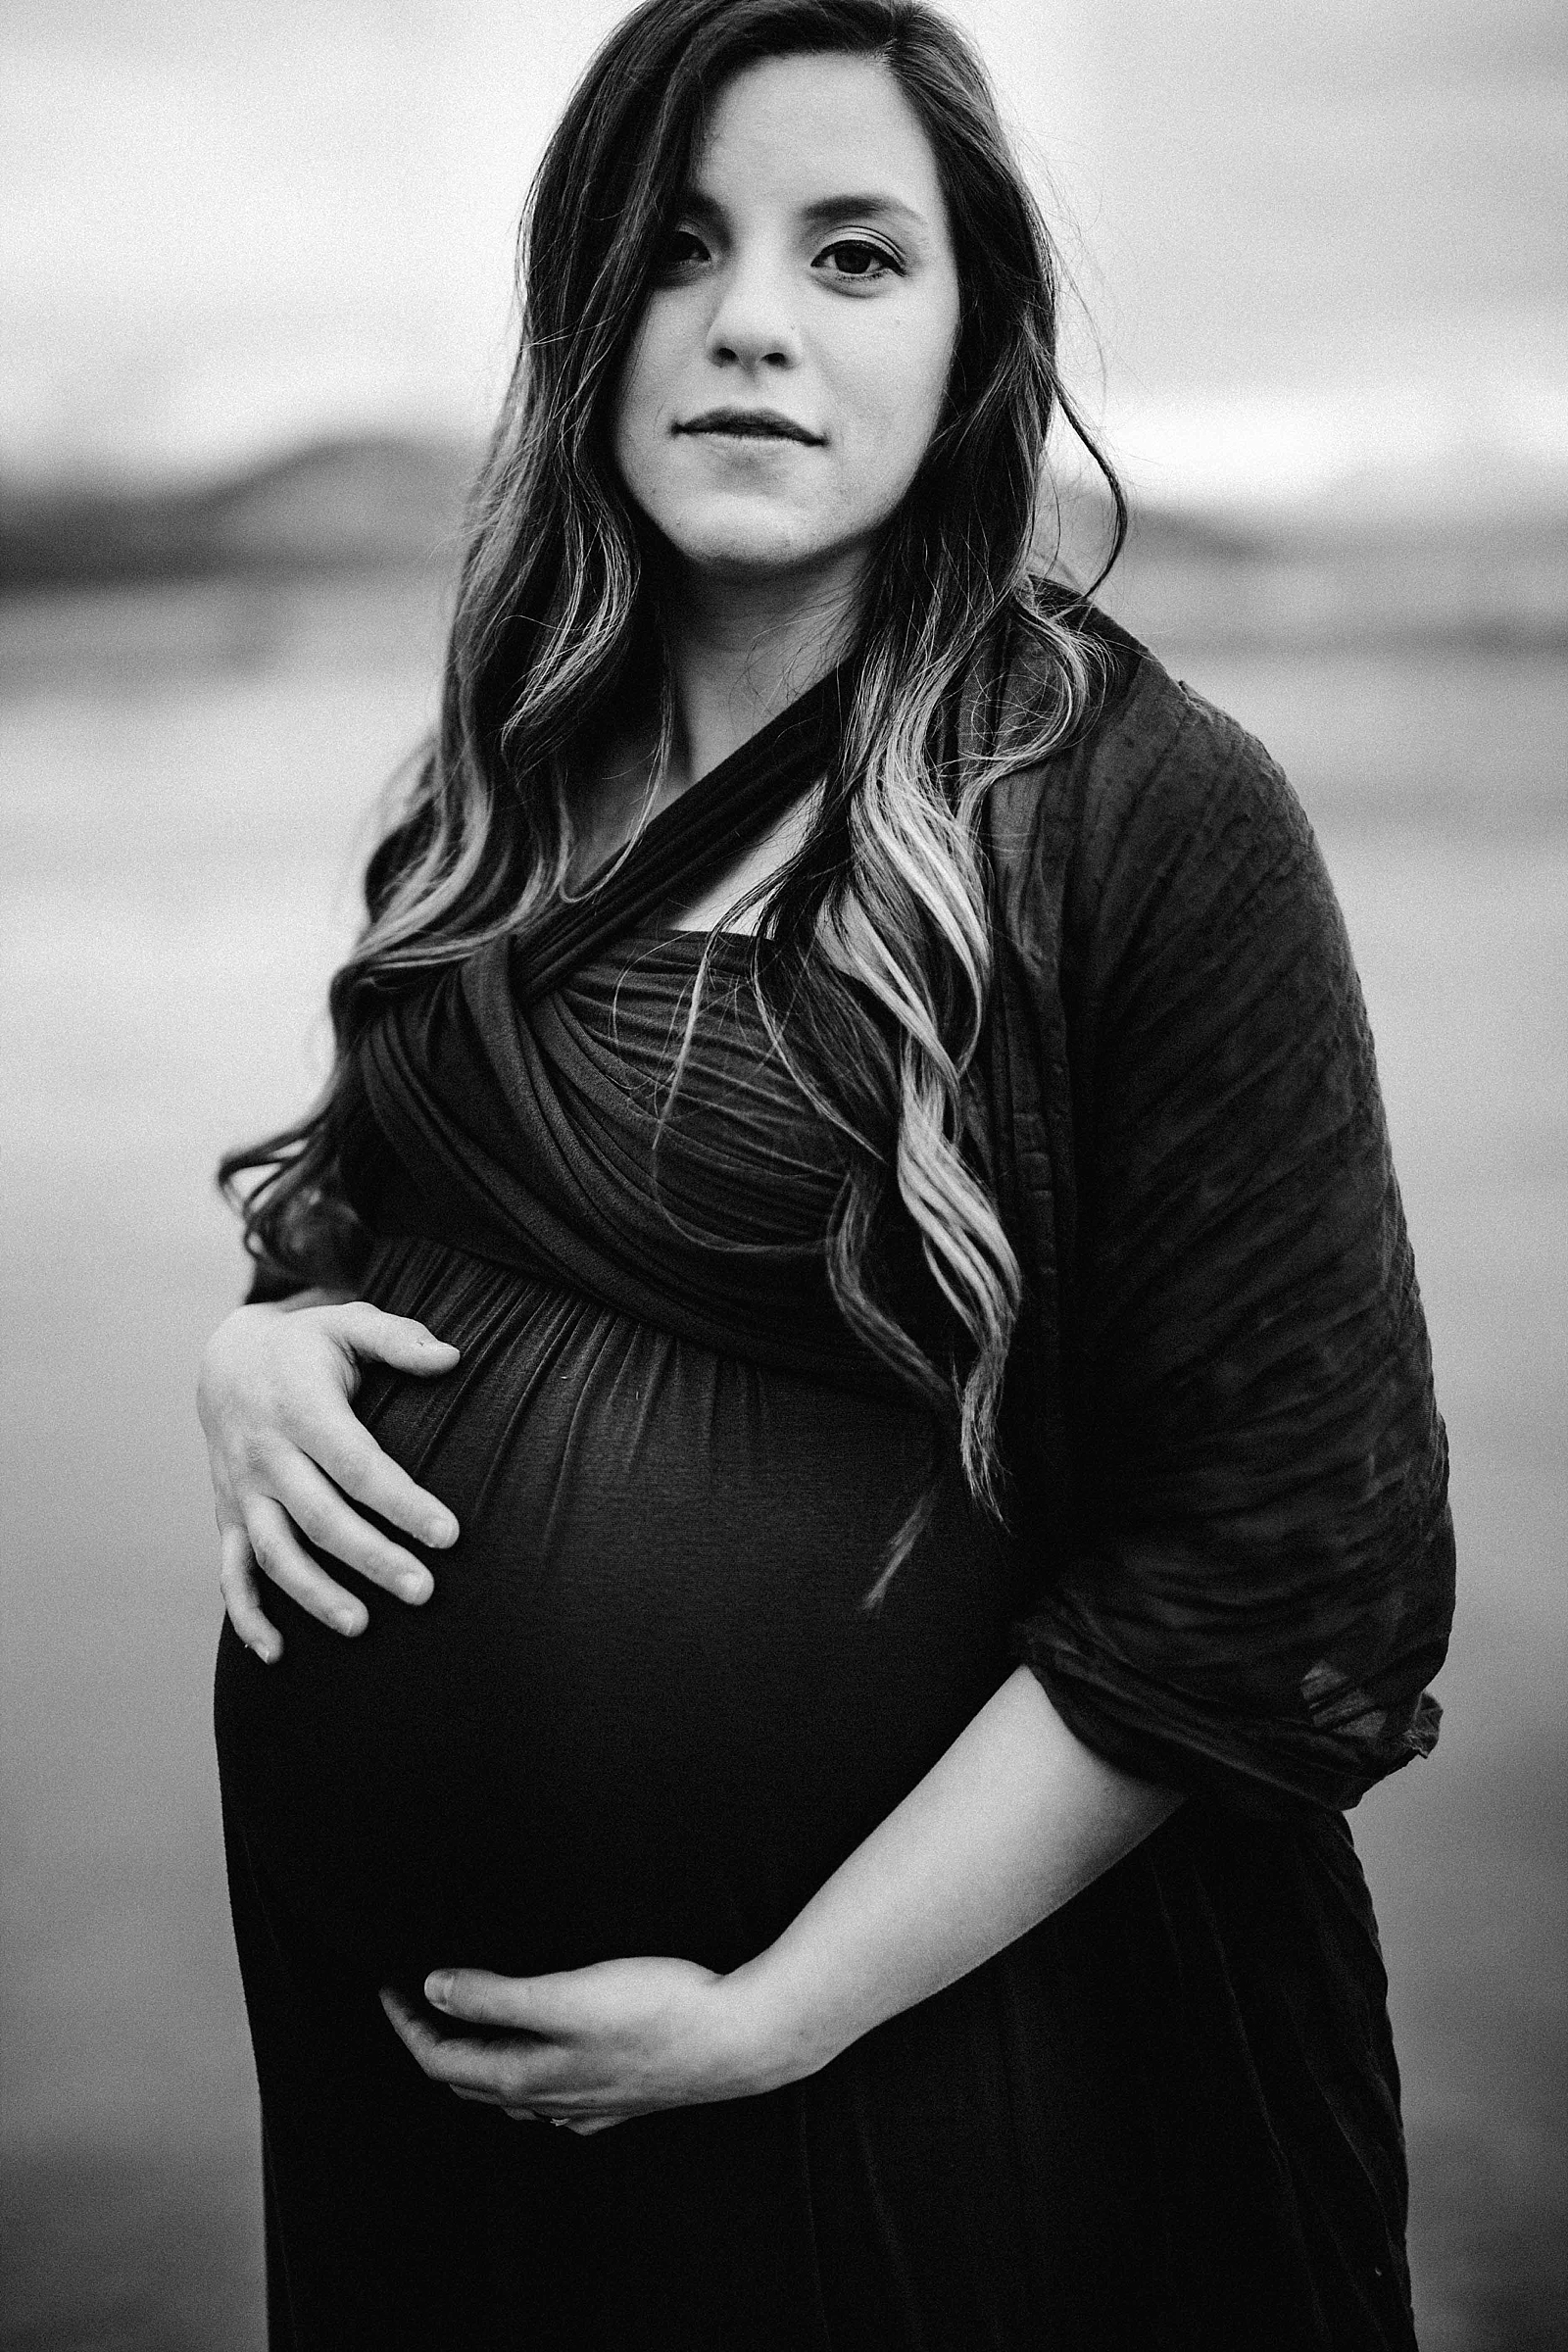 Anchorage Maternity Photographer / Maternity on the Mudflats